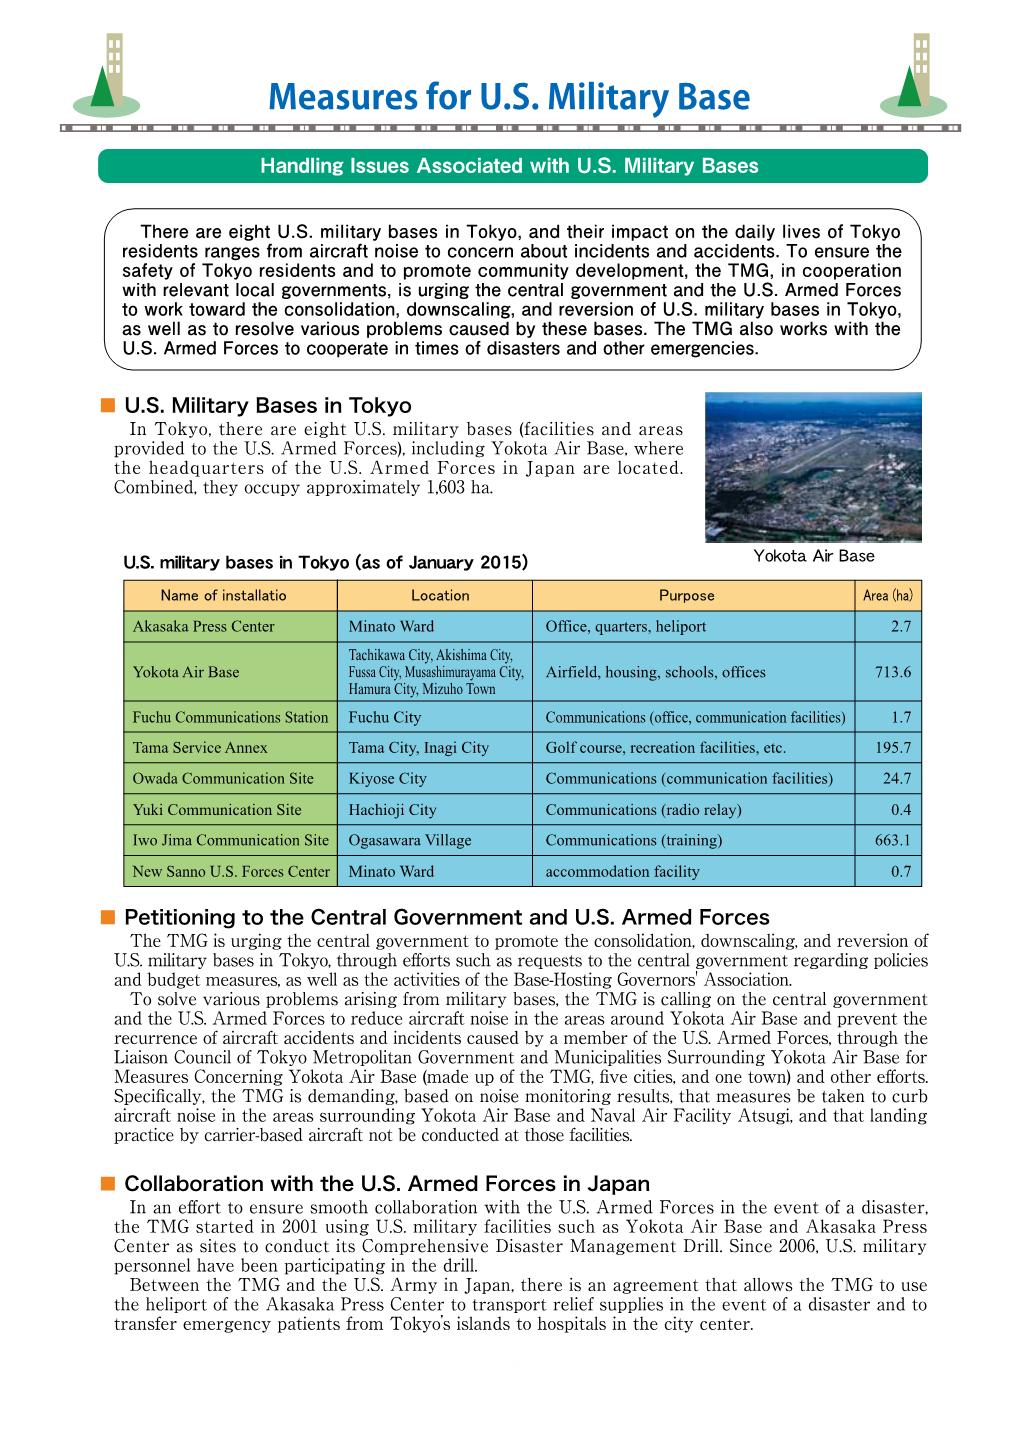 Measures for U.S. Military Base Promotion of Civil-Military Dual-Use of Yokota Air Base Handling Issues Associated with U.S